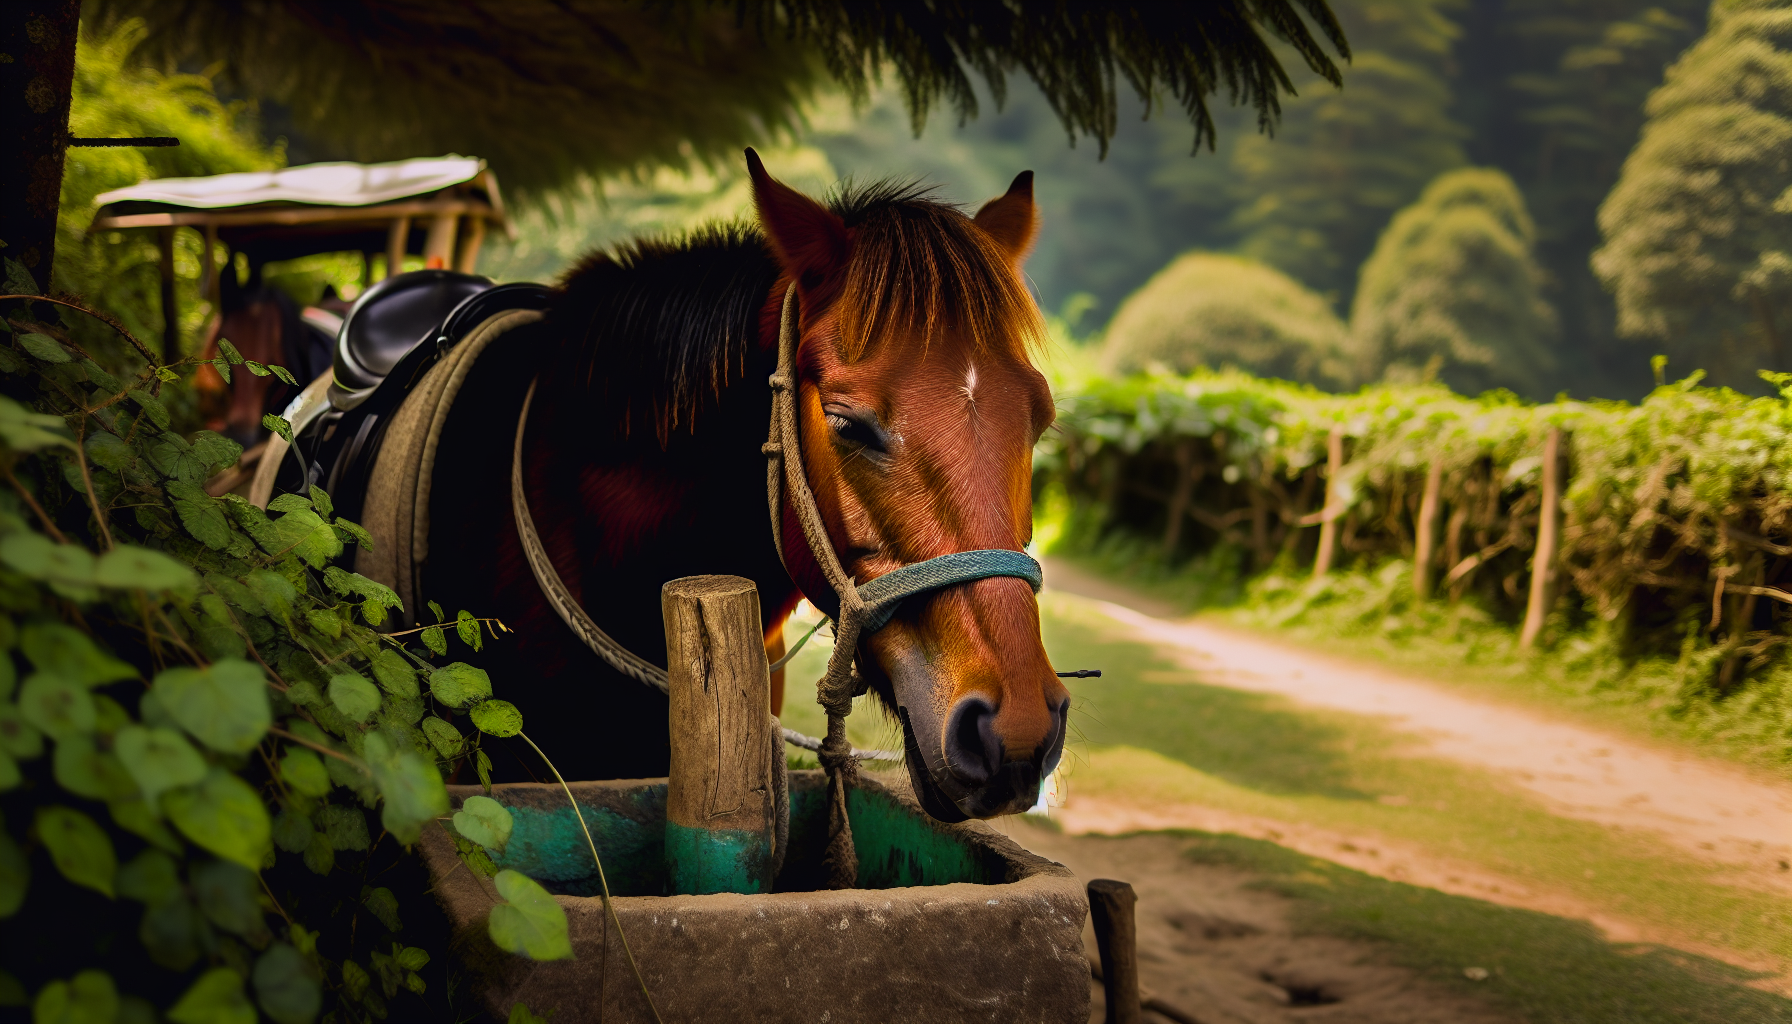 Rest stops and breaks for horse well-being during travel